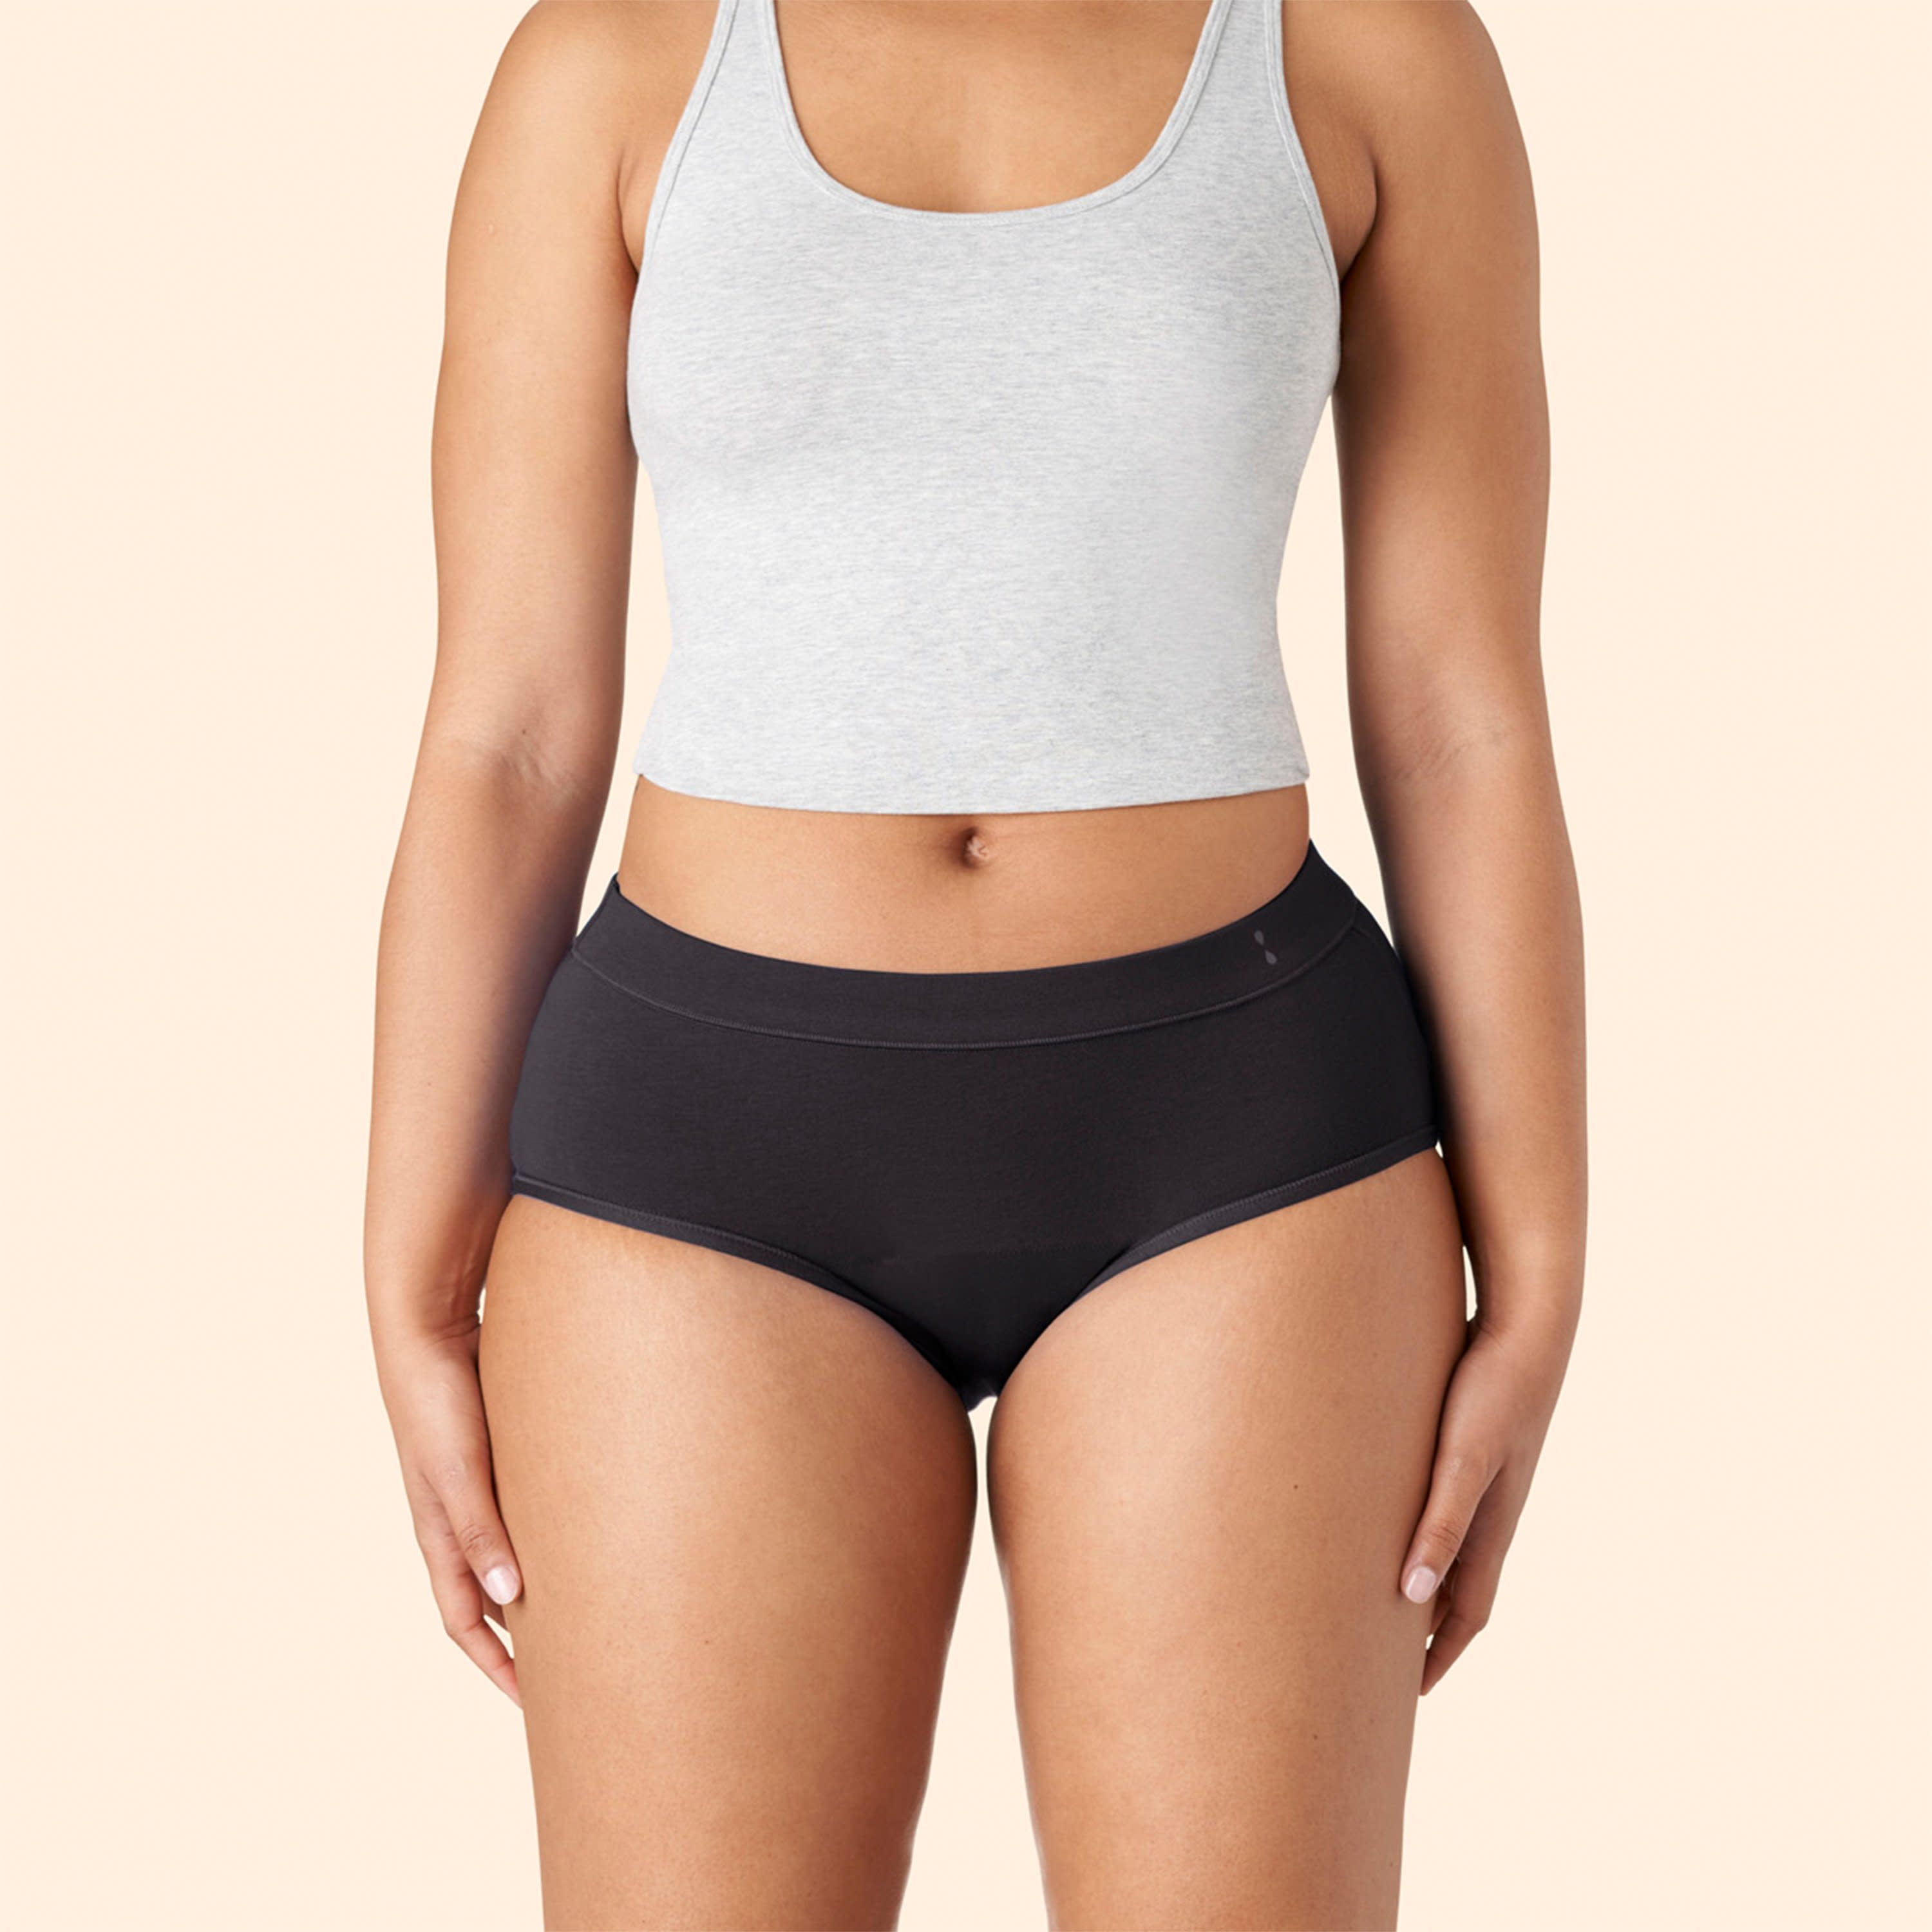 Thinx for All Women's Super Absorbency Cotton Brief Period Underwear, Extra  Large, Black